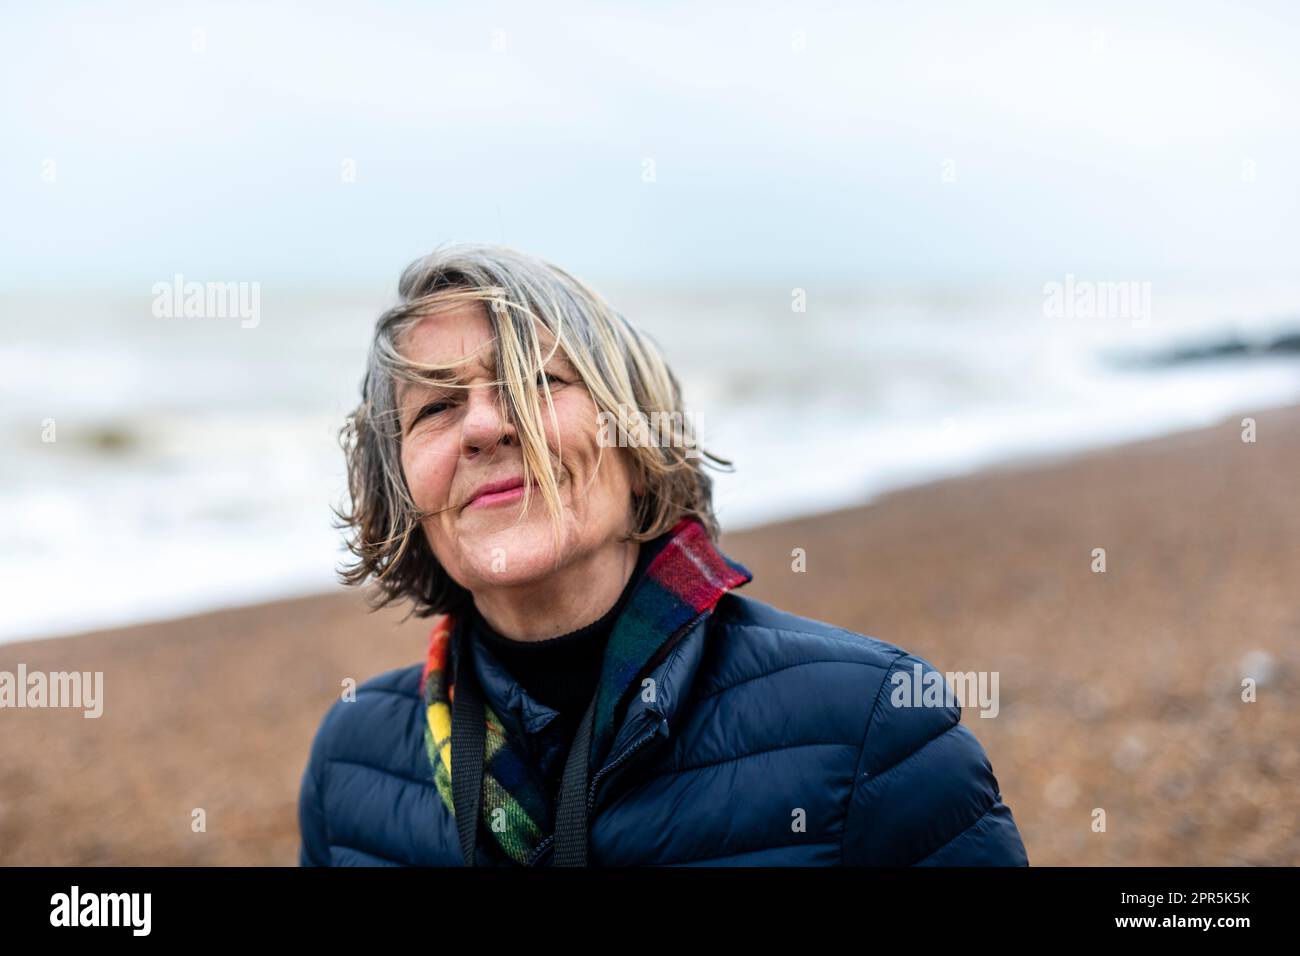 Middle age woman Wind swept on the beach looking at camera smiling Stock Photo